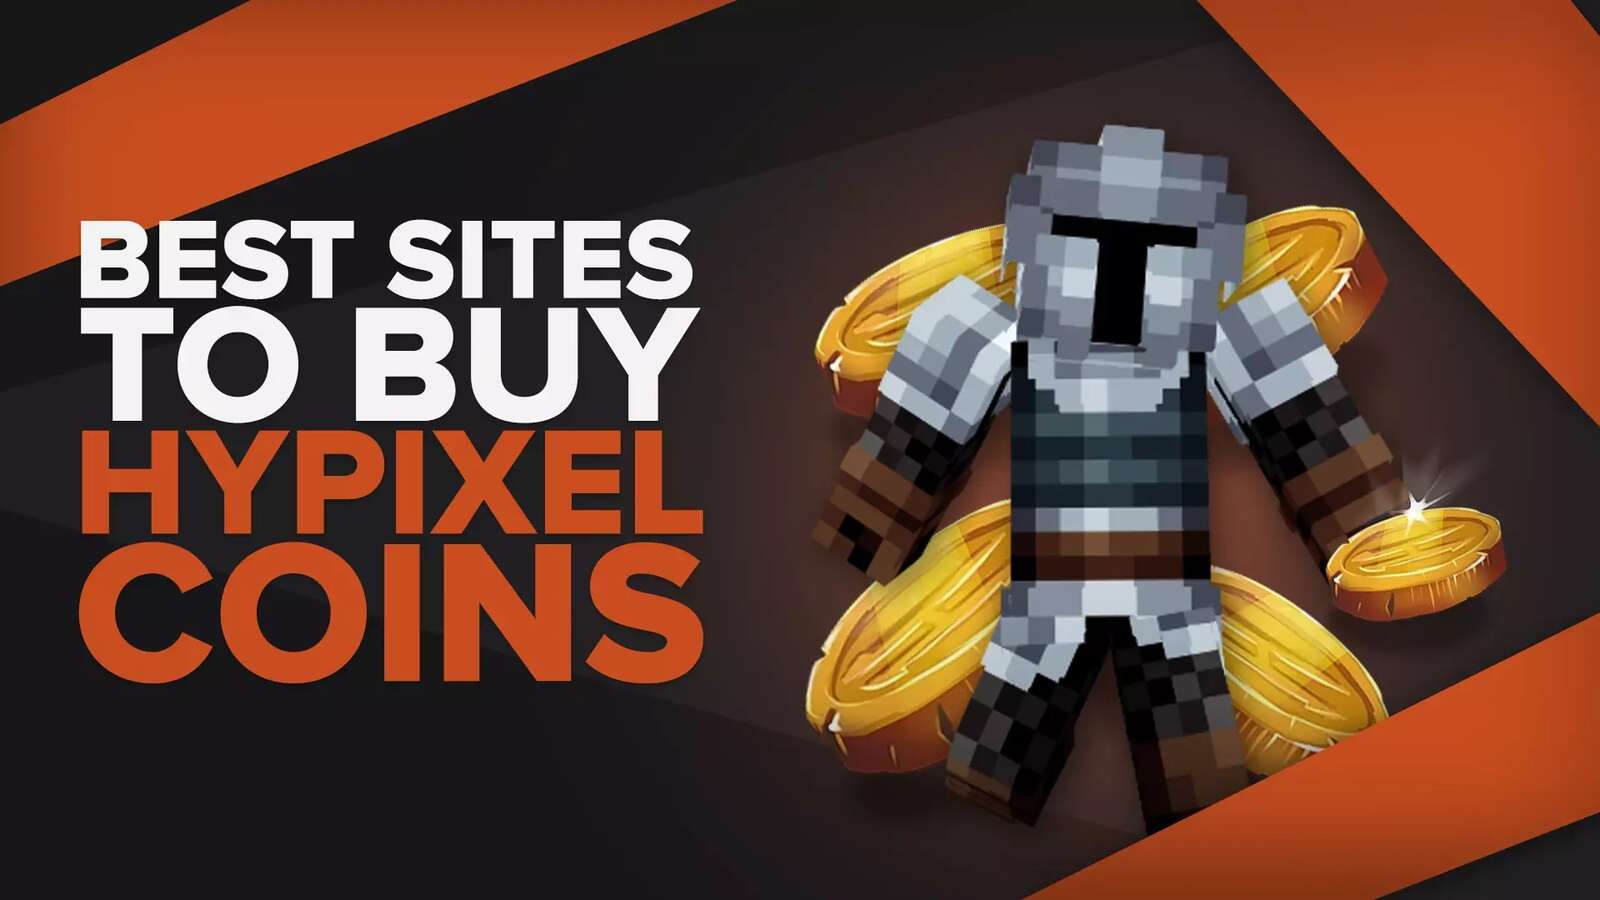 The 4 Best Sites to Buy Hypixel Coins [Tested & Reviewed]